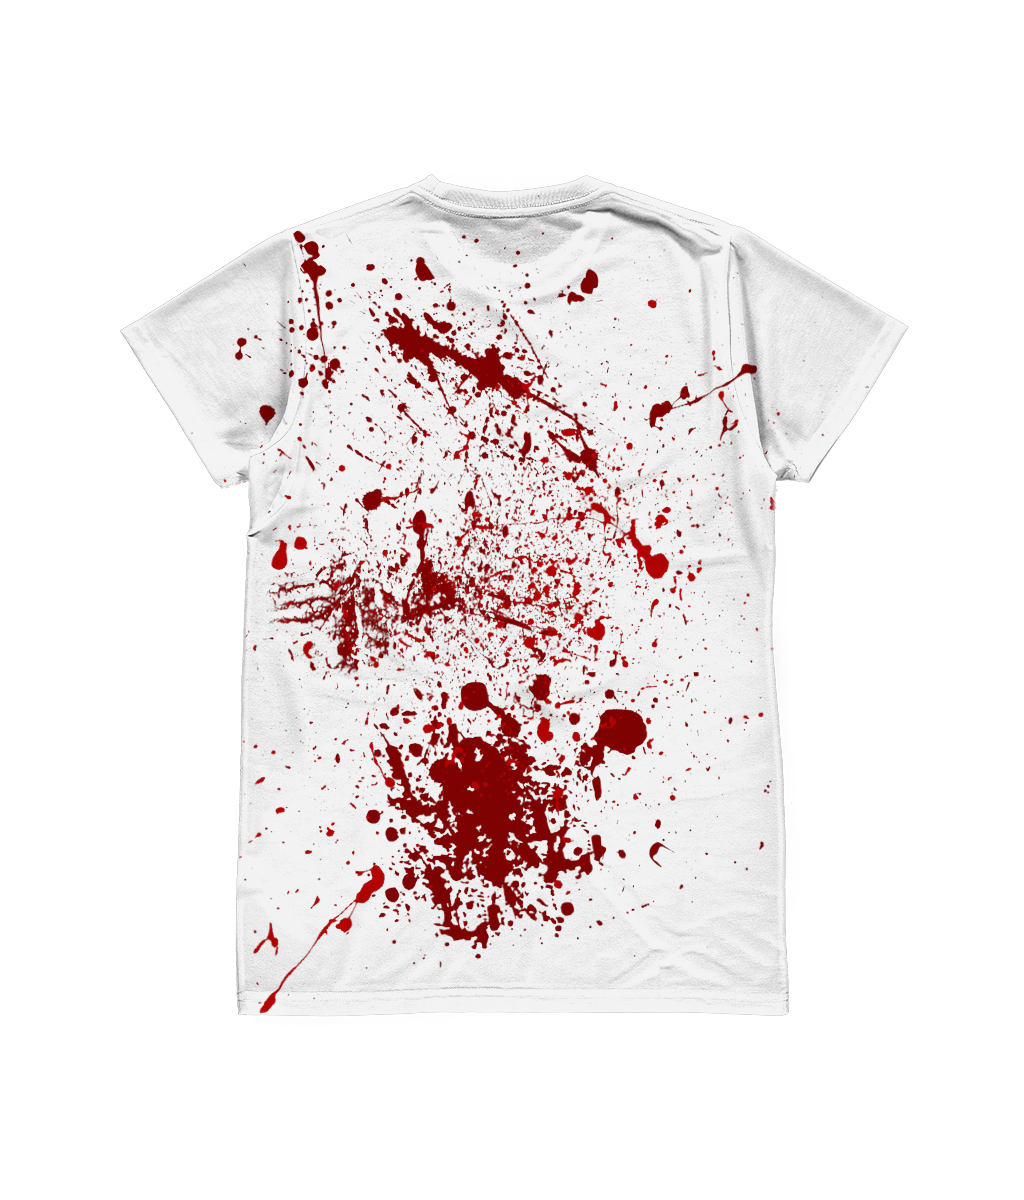 i'm fine it's not my blood. Unisex All-Over Sublimation T-shirt XS-2XL